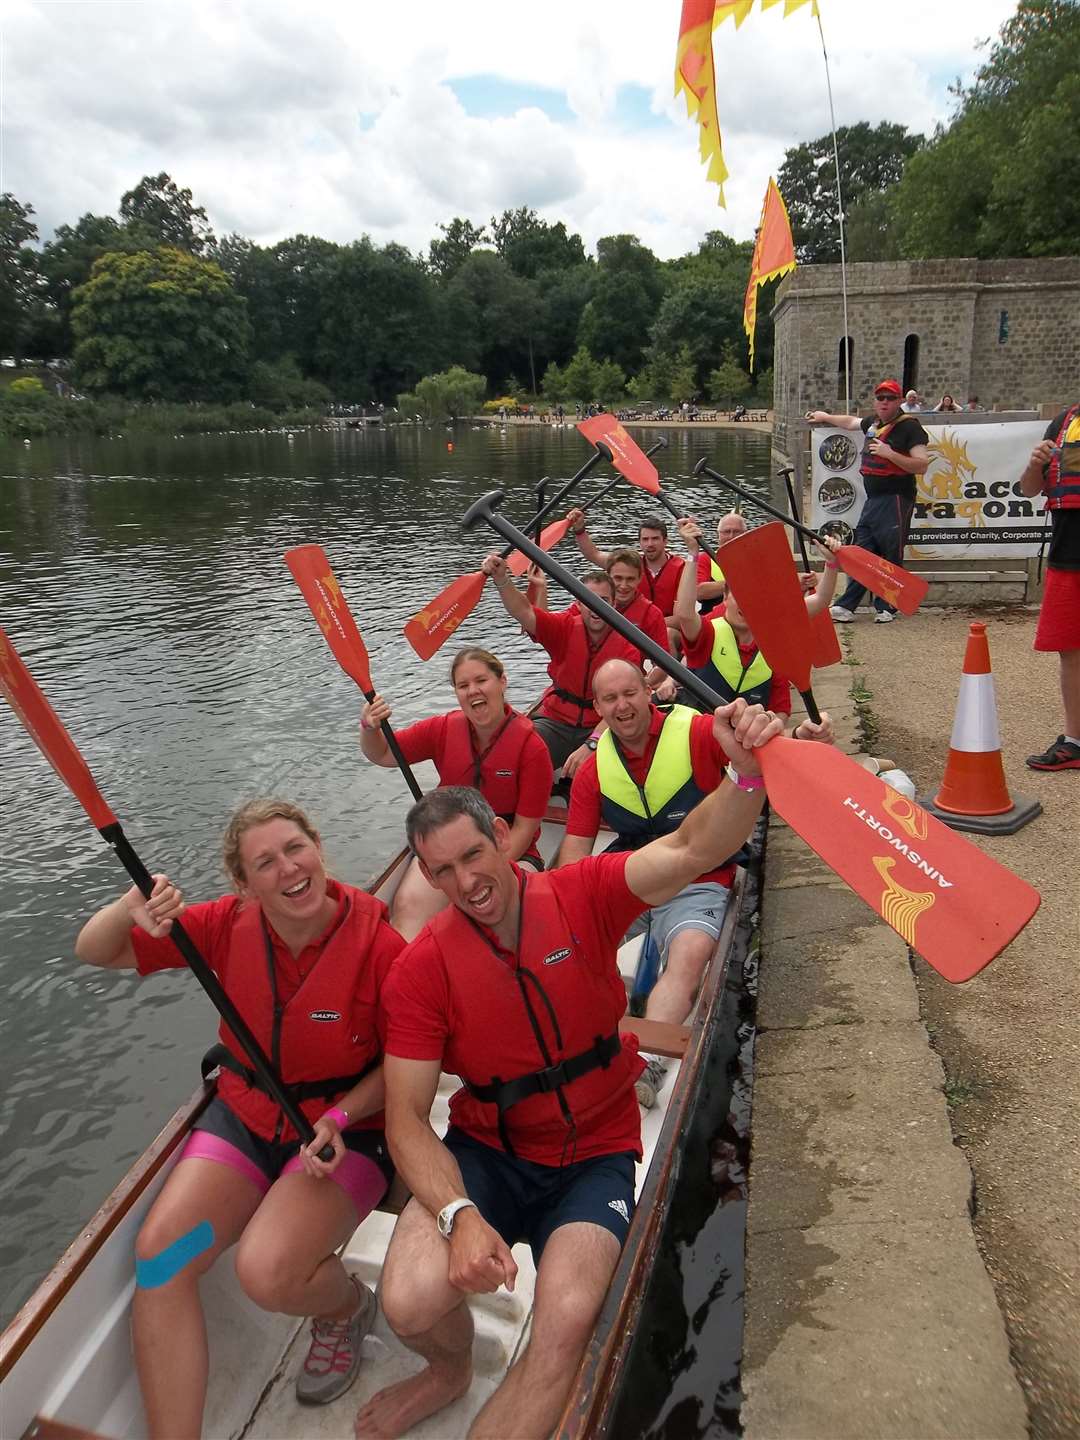 2012 olympic gold medal winning canoeist Etienne Stott (front right) celebrates with crew members of Hi Kent after winning the Minor Final at the KM Dragon Boat Race. The minor final involved teams that were placed 7 to 12 in the three heats